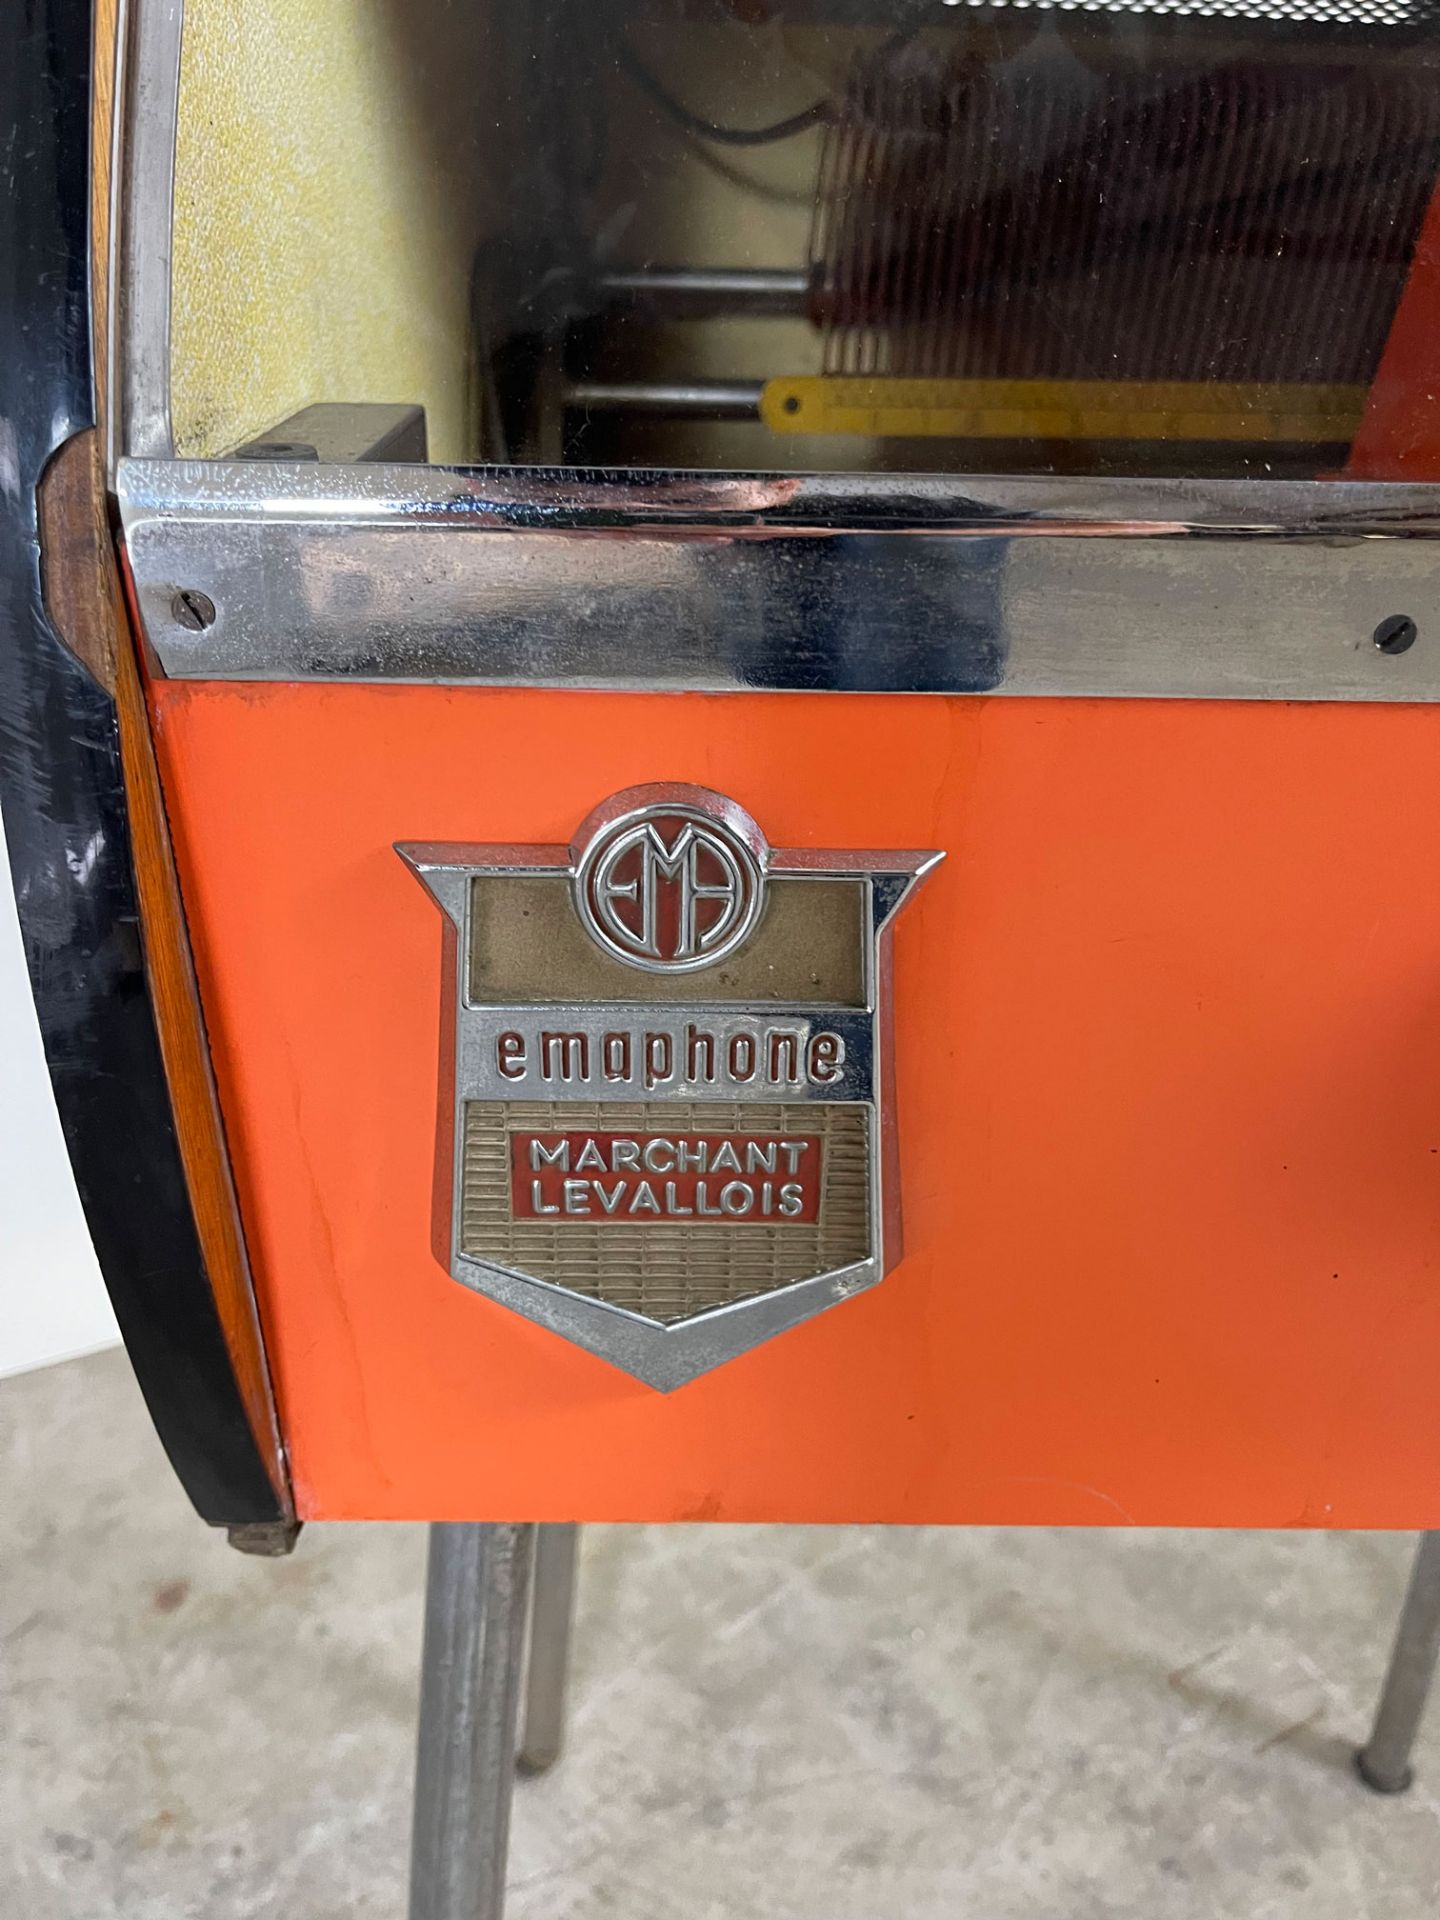 1958-59 Very Rare Marchant Emaphone 72 Jukebox - Image 10 of 10